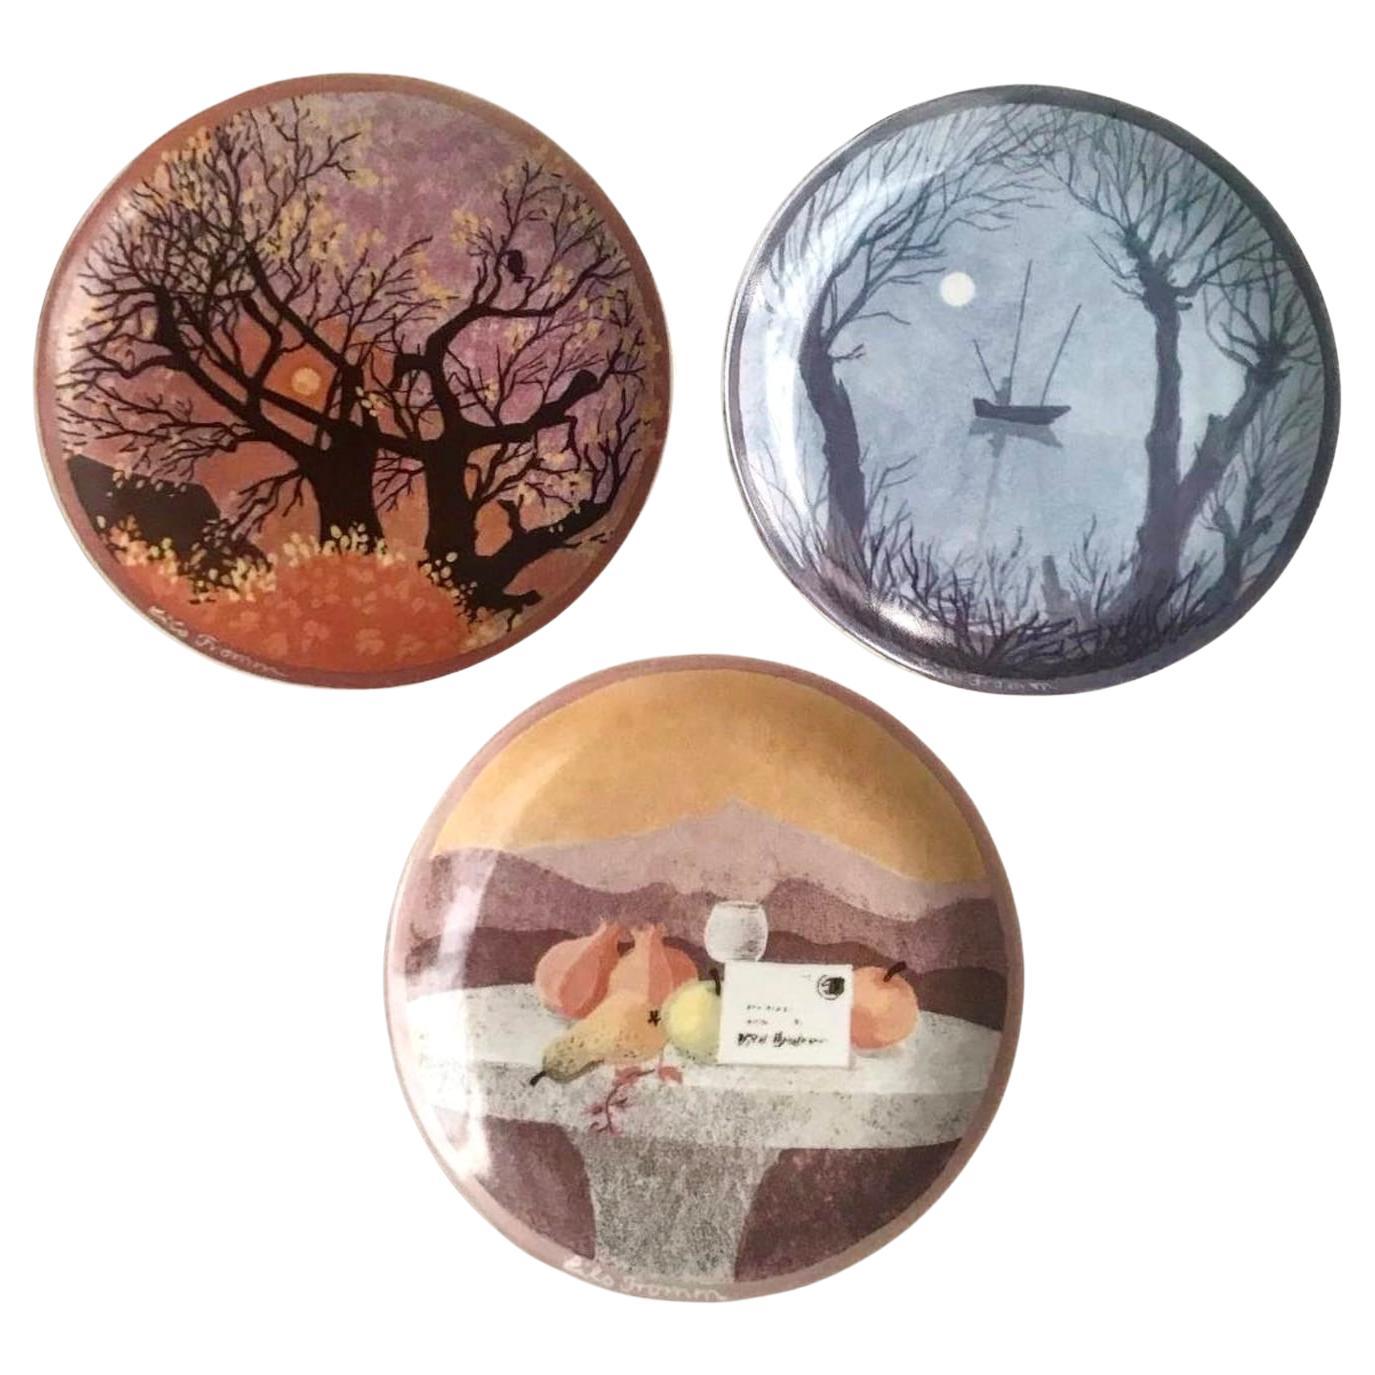 Lilo Fromm Decorative Plates  Sophienthal Wall Plates “Autumn” series “Seasons” For Sale